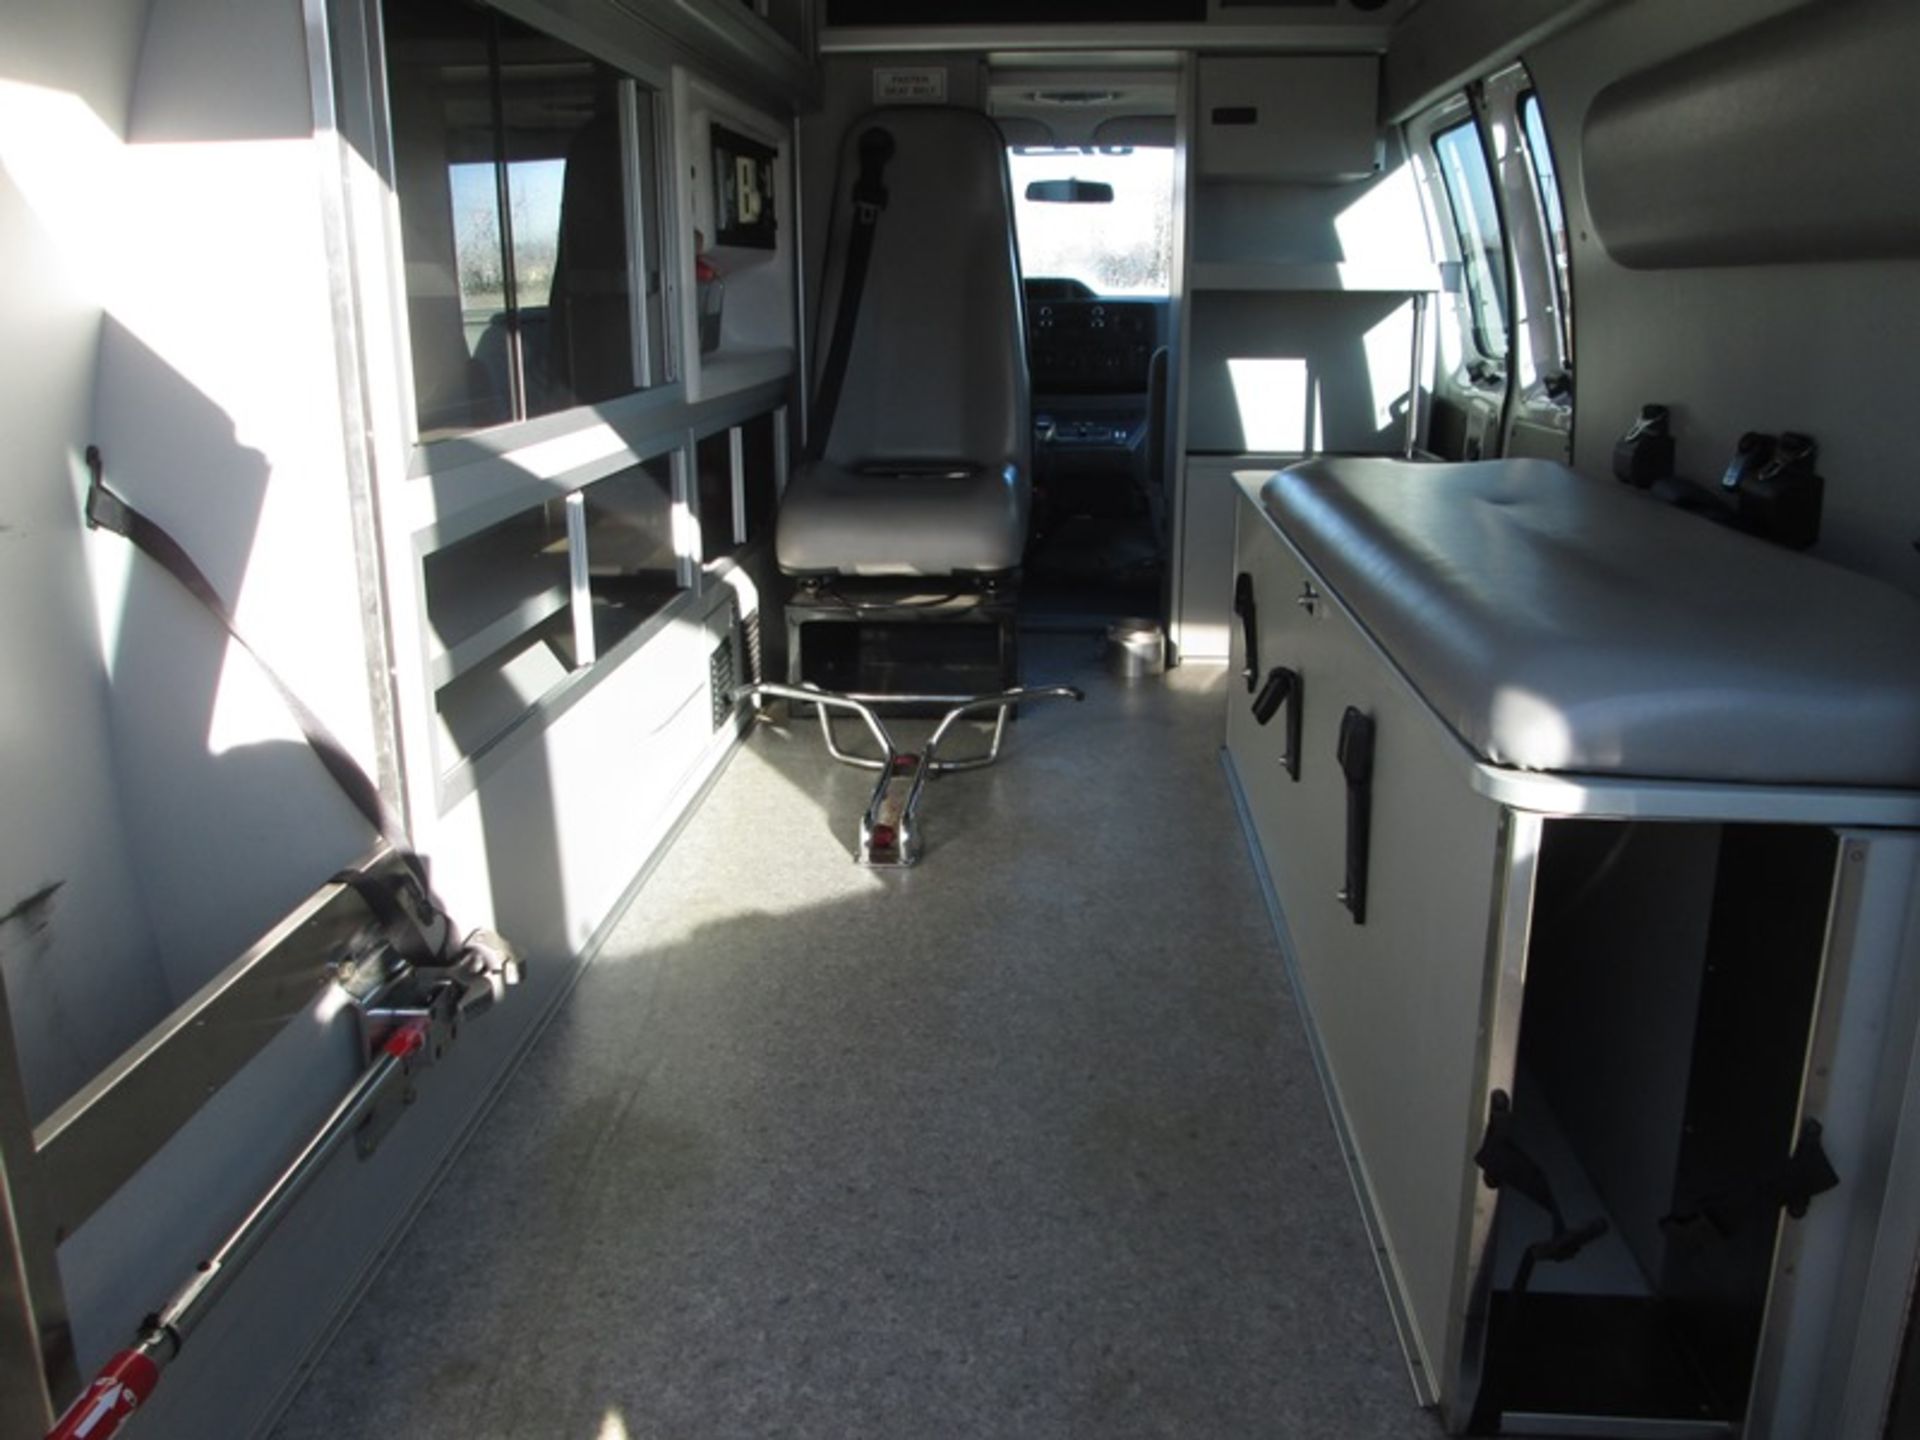 2010 FORD E350 DSL CRUSADER BY WHEEL COACH VIN #1FDSS3EP9DA32493 112,109 MILES UNIT #122 CRUSADER BY - Image 6 of 6